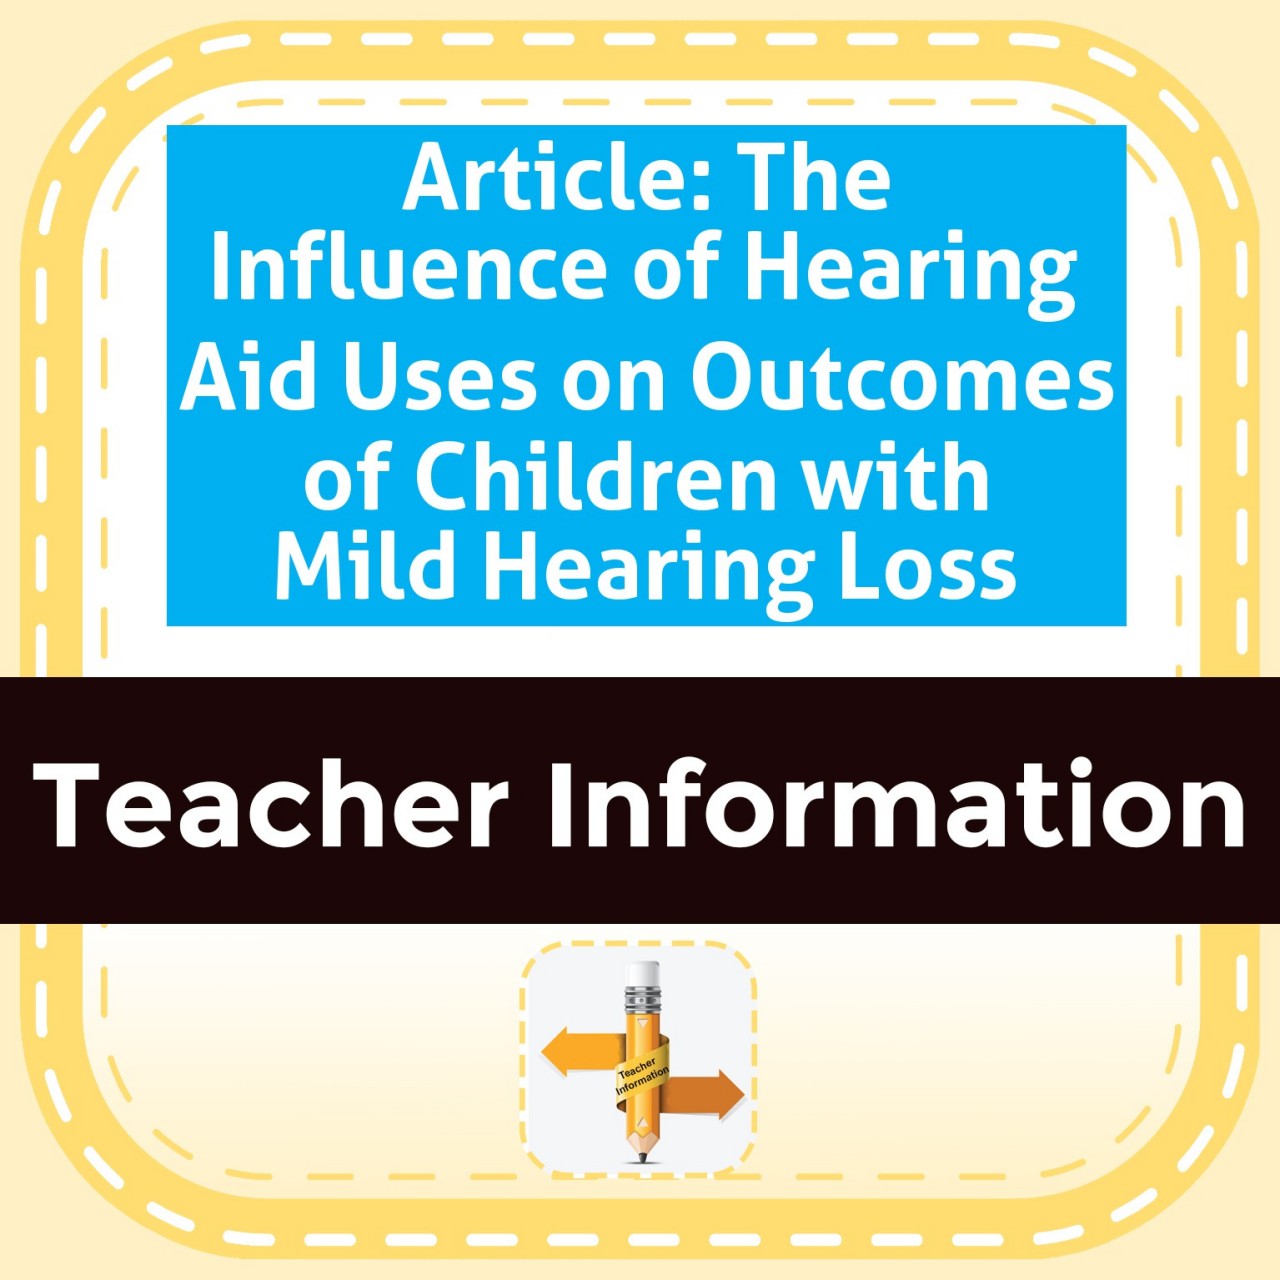 Article: The Influence of Hearing Aid Uses on Outcomes of Children with Mild Hearing Loss